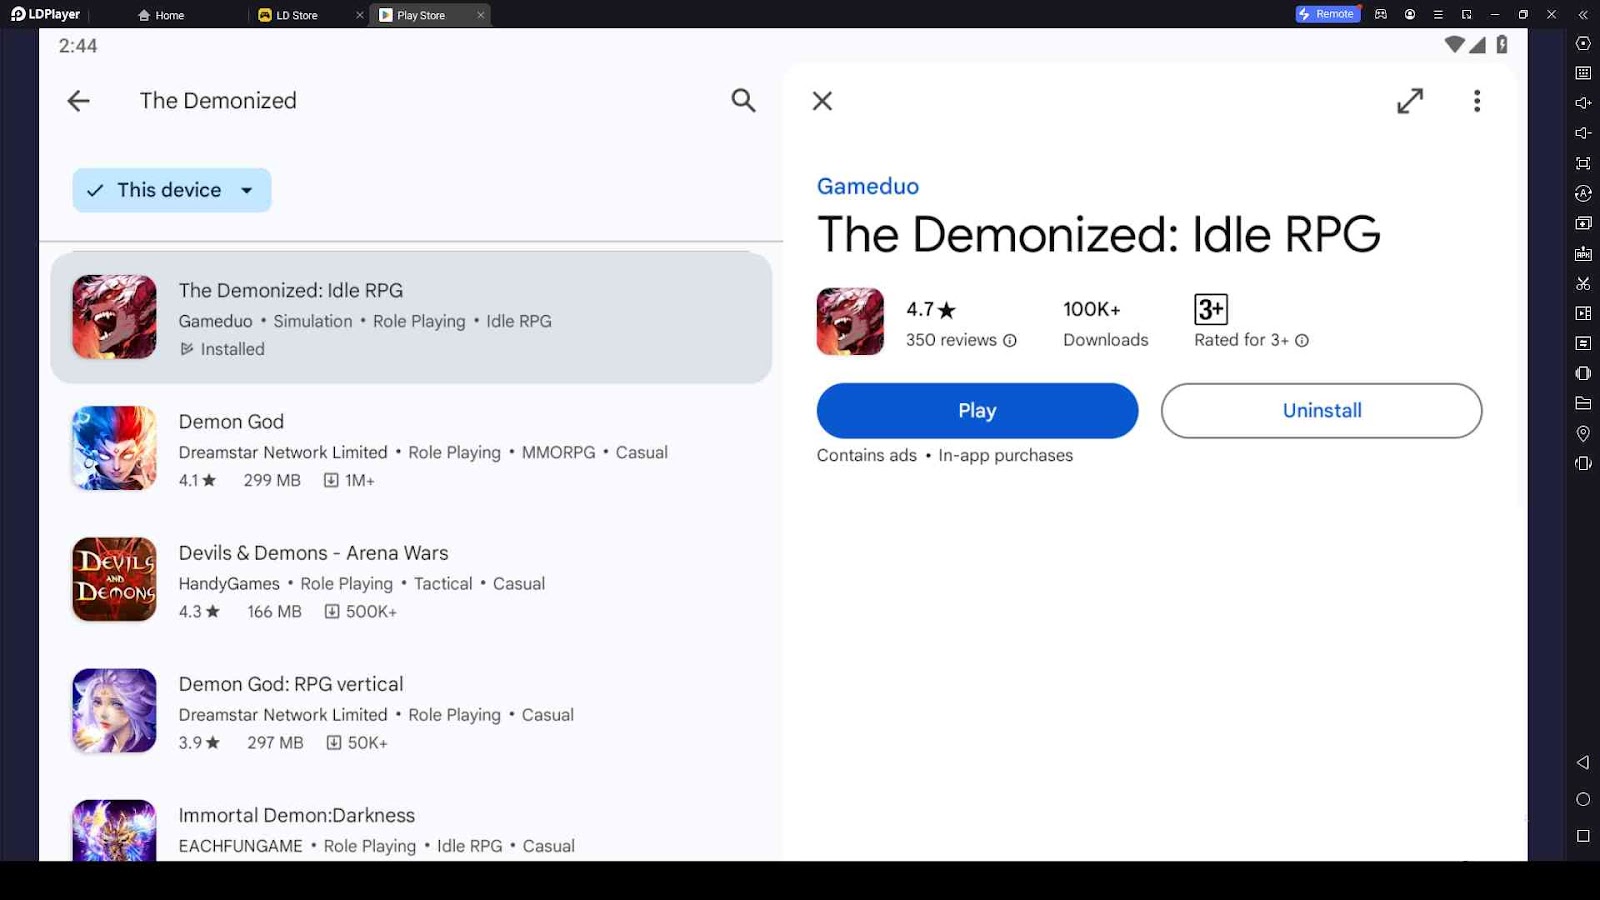 Playing The Demonized on PC with LDPlayer